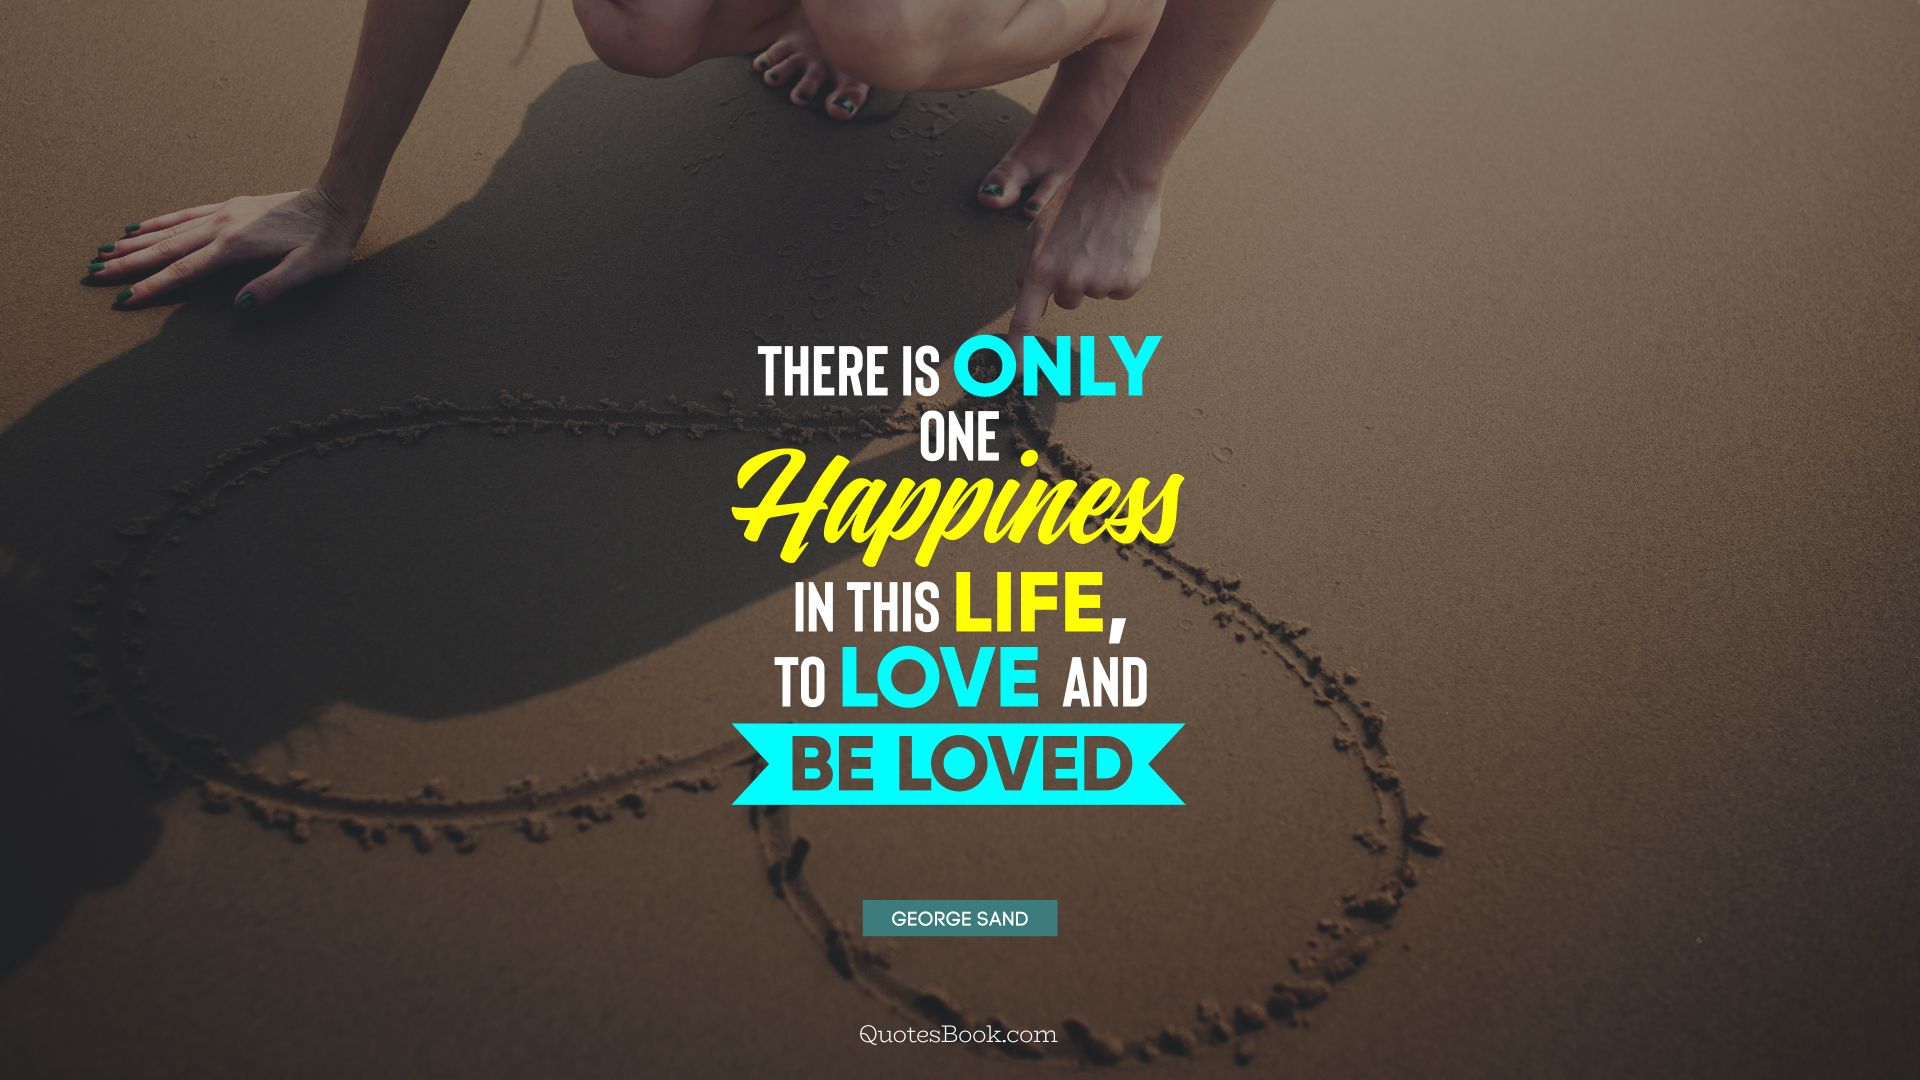 There is only one happiness in this life, to love and be loved. - Quote by George Sand